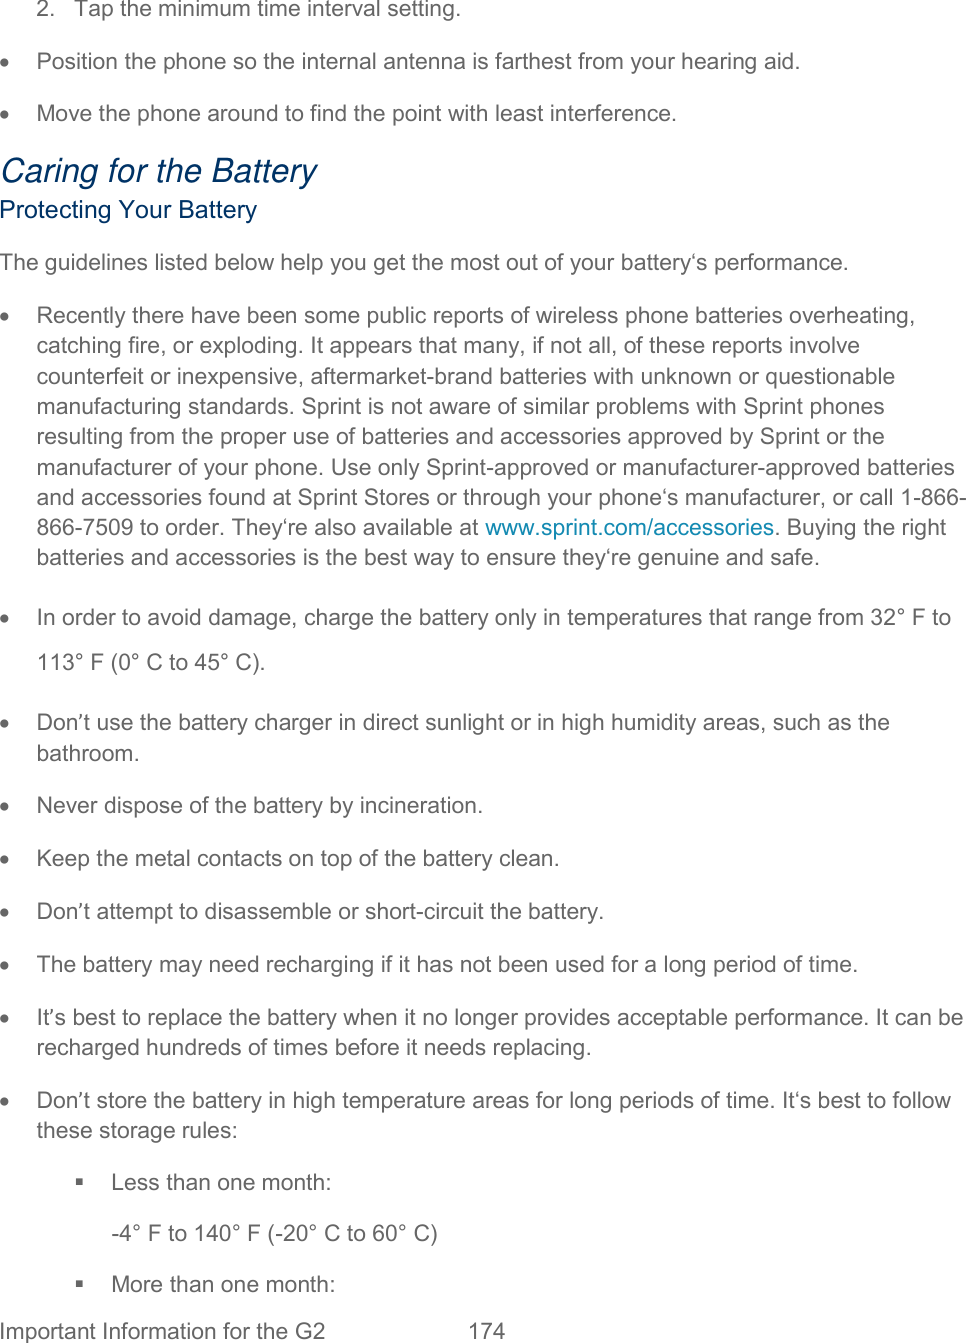  Important Information for the G2 174    2.  Tap the minimum time interval setting.   Position the phone so the internal antenna is farthest from your hearing aid.   Move the phone around to find the point with least interference. Caring for the Battery Protecting Your Battery The guidelines listed below help you get the most out of your battery‘s performance.   Recently there have been some public reports of wireless phone batteries overheating, catching fire, or exploding. It appears that many, if not all, of these reports involve counterfeit or inexpensive, aftermarket-brand batteries with unknown or questionable manufacturing standards. Sprint is not aware of similar problems with Sprint phones resulting from the proper use of batteries and accessories approved by Sprint or the manufacturer of your phone. Use only Sprint-approved or manufacturer-approved batteries and accessories found at Sprint Stores or through your phone‘s manufacturer, or call 1-866-866-7509 to order. They‘re also available at www.sprint.com/accessories. Buying the right batteries and accessories is the best way to ensure they‘re genuine and safe.   In order to avoid damage, charge the battery only in temperatures that range from 32° F to 113° F (0° C to 45° C).   Don’t use the battery charger in direct sunlight or in high humidity areas, such as the bathroom.   Never dispose of the battery by incineration.   Keep the metal contacts on top of the battery clean.   Don’t attempt to disassemble or short-circuit the battery.   The battery may need recharging if it has not been used for a long period of time.  It’s best to replace the battery when it no longer provides acceptable performance. It can be recharged hundreds of times before it needs replacing.   Don’t store the battery in high temperature areas for long periods of time. It‘s best to follow these storage rules:   Less than one month: -4° F to 140° F (-20° C to 60° C)   More than one month: 